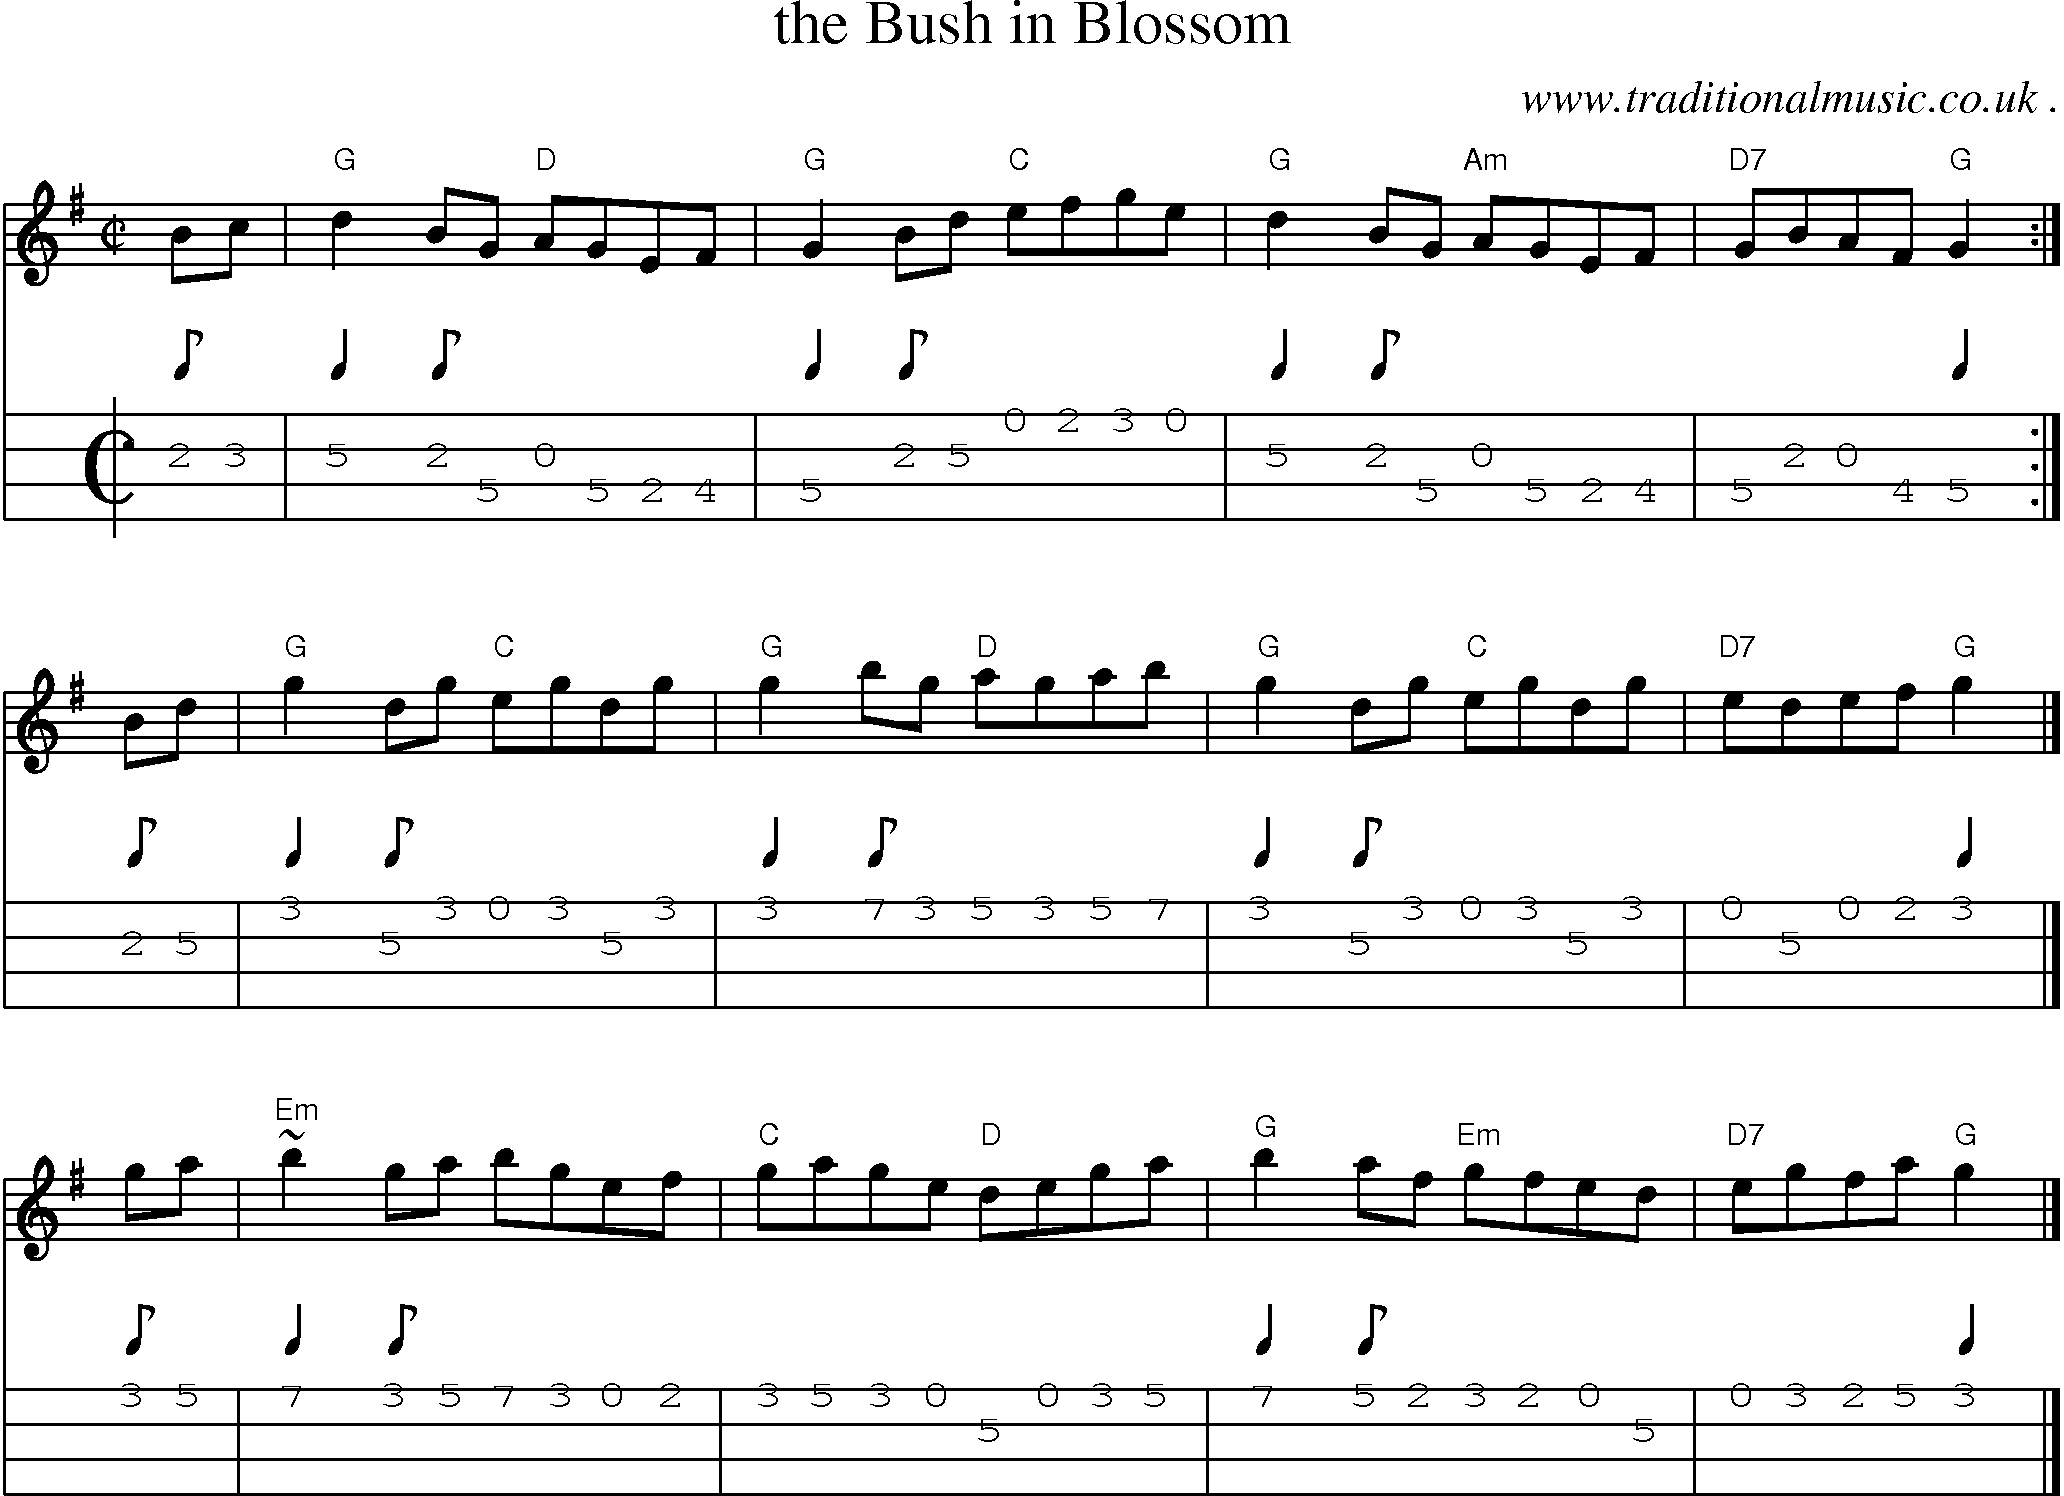 Sheet-music  score, Chords and Mandolin Tabs for The Bush In Blossom